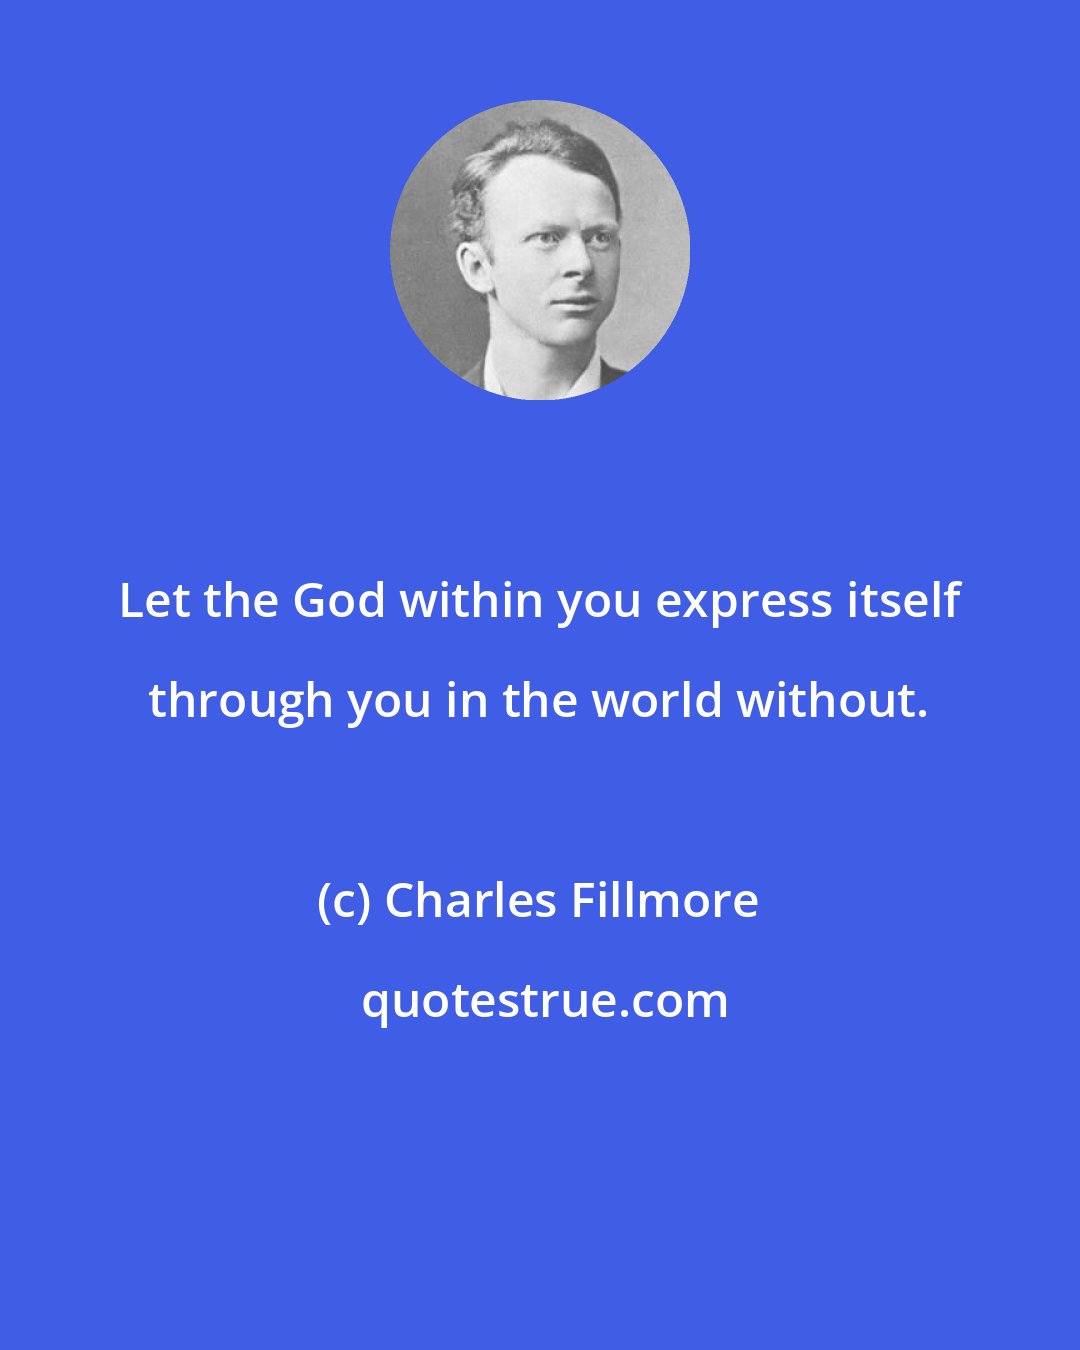 Charles Fillmore: Let the God within you express itself through you in the world without.